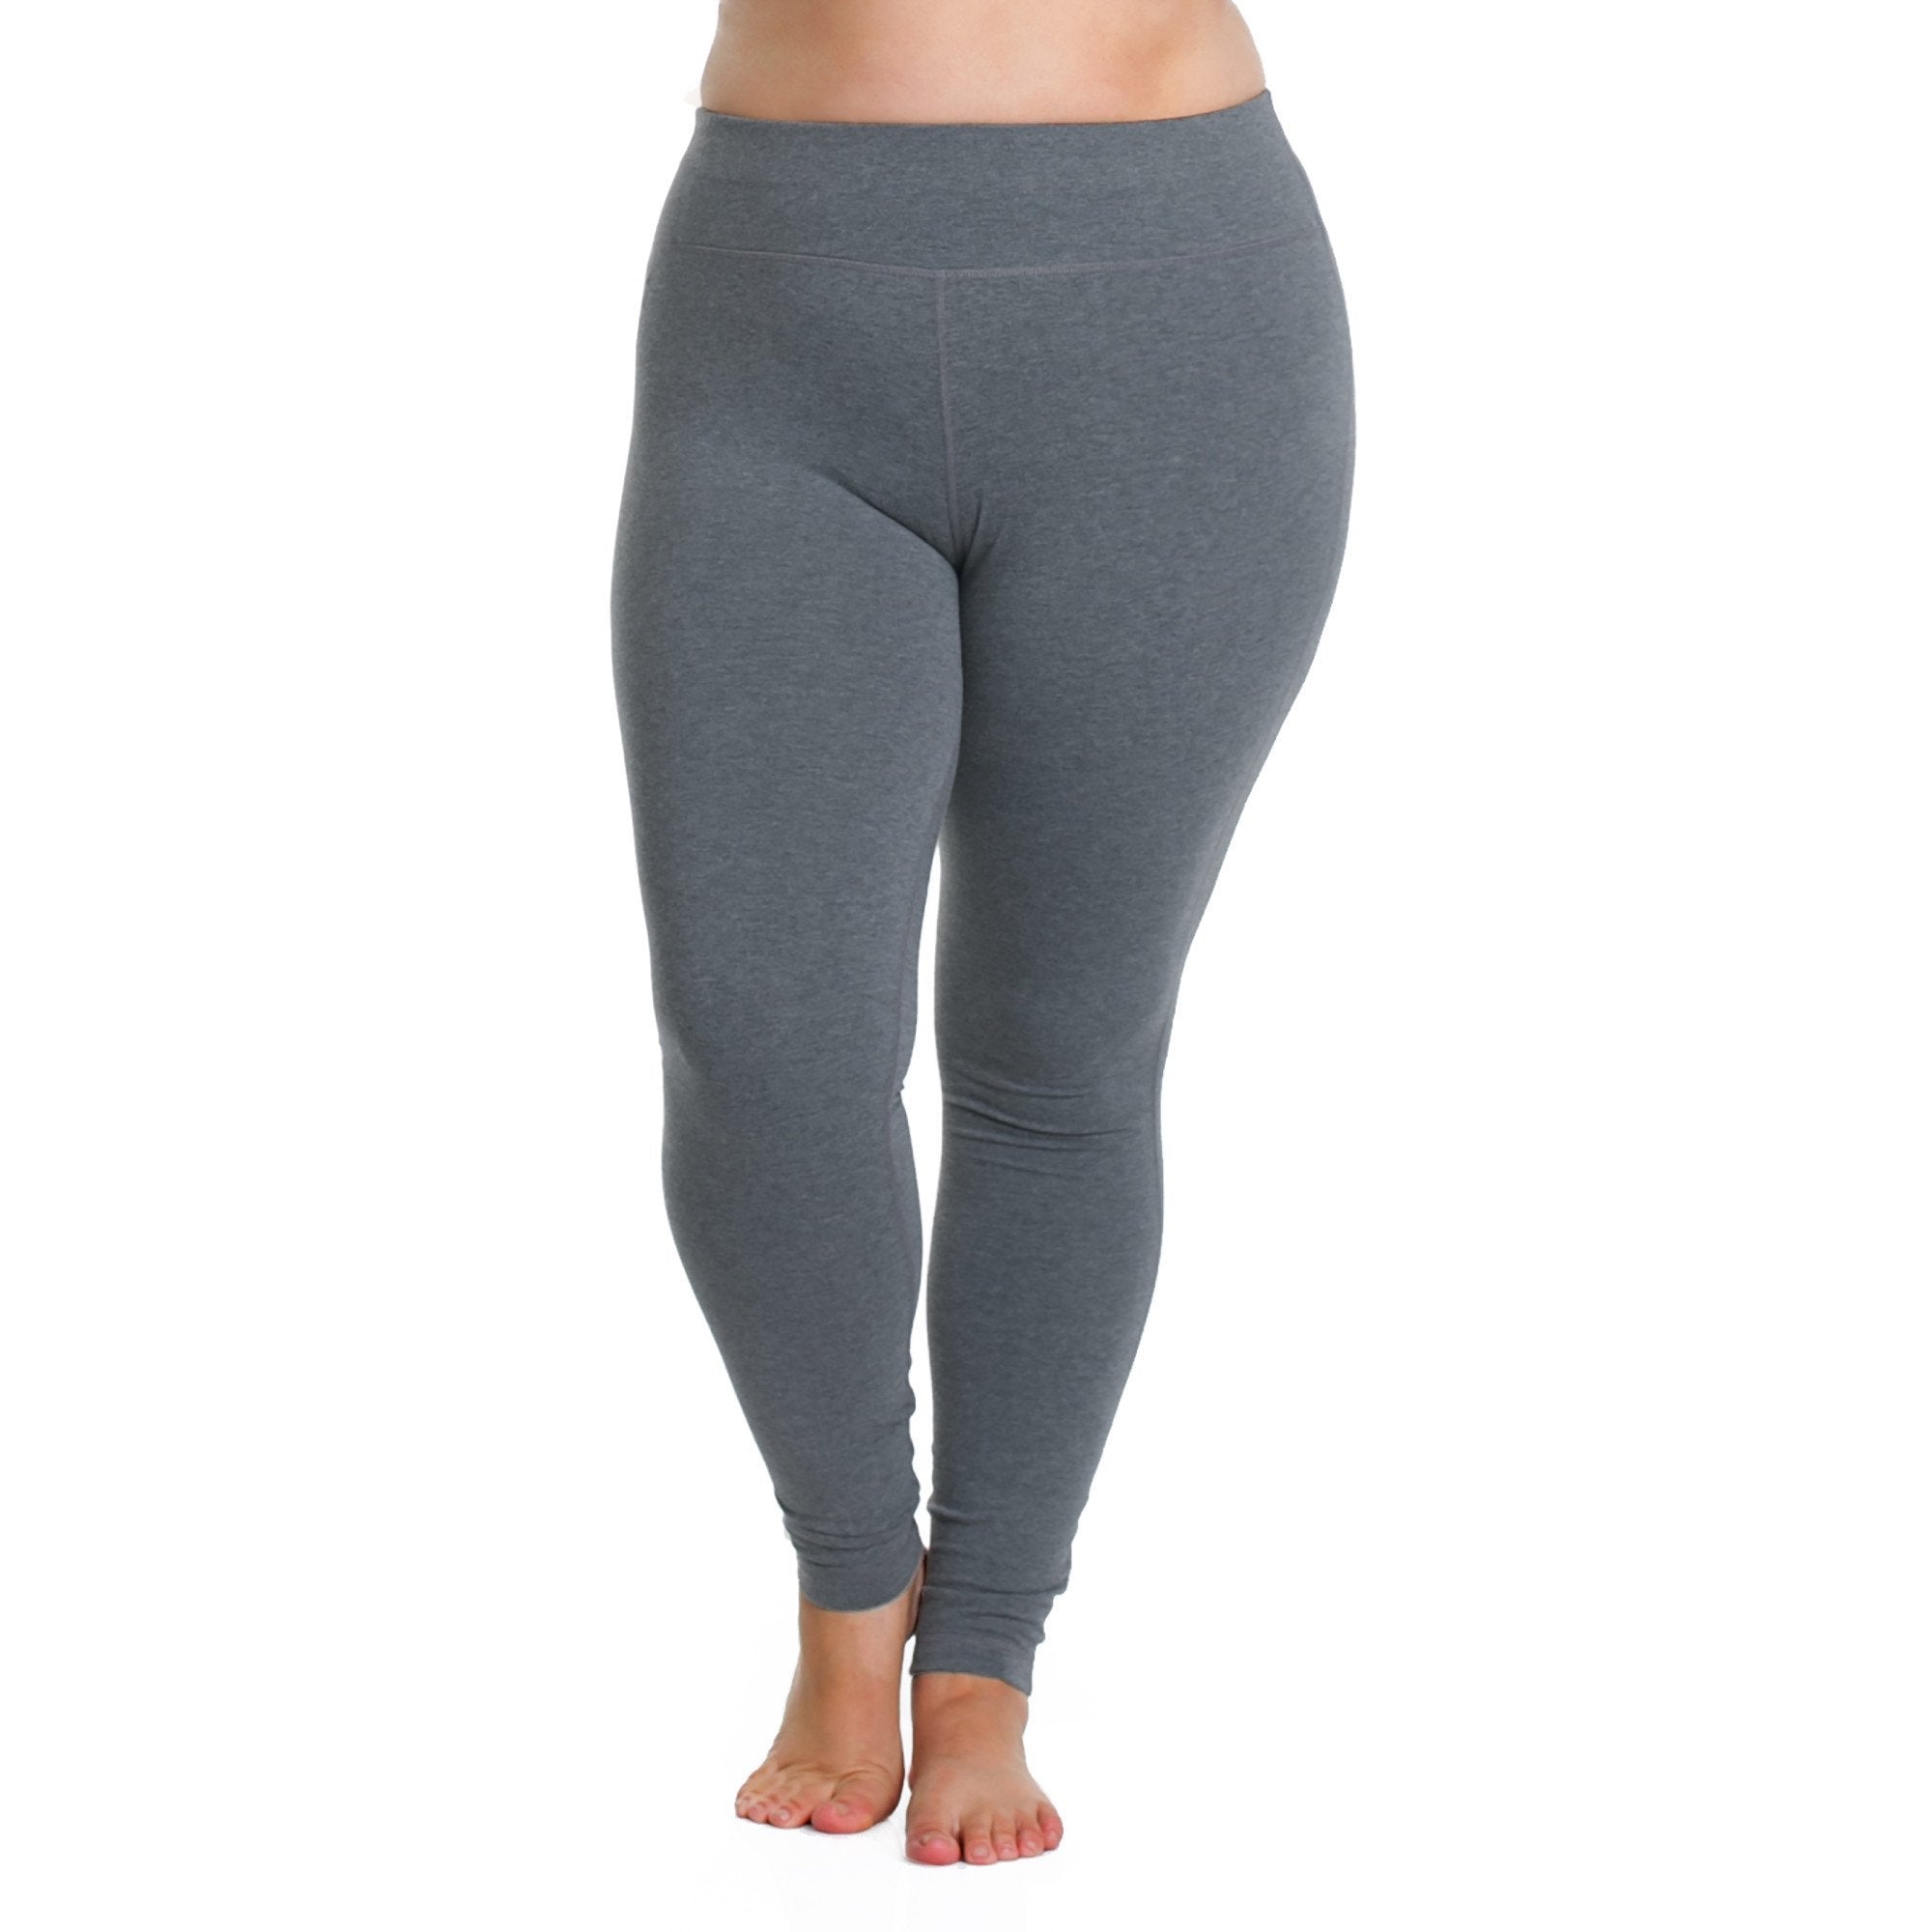 Curve Basix Leggings - Rainbeau Curves, 14/16 / Charcoal, activewear, athleisure, fitness, workout, gym, performance, womens, ladies, plus size, curvy, full figured, spandex, cotton, polyester - 3